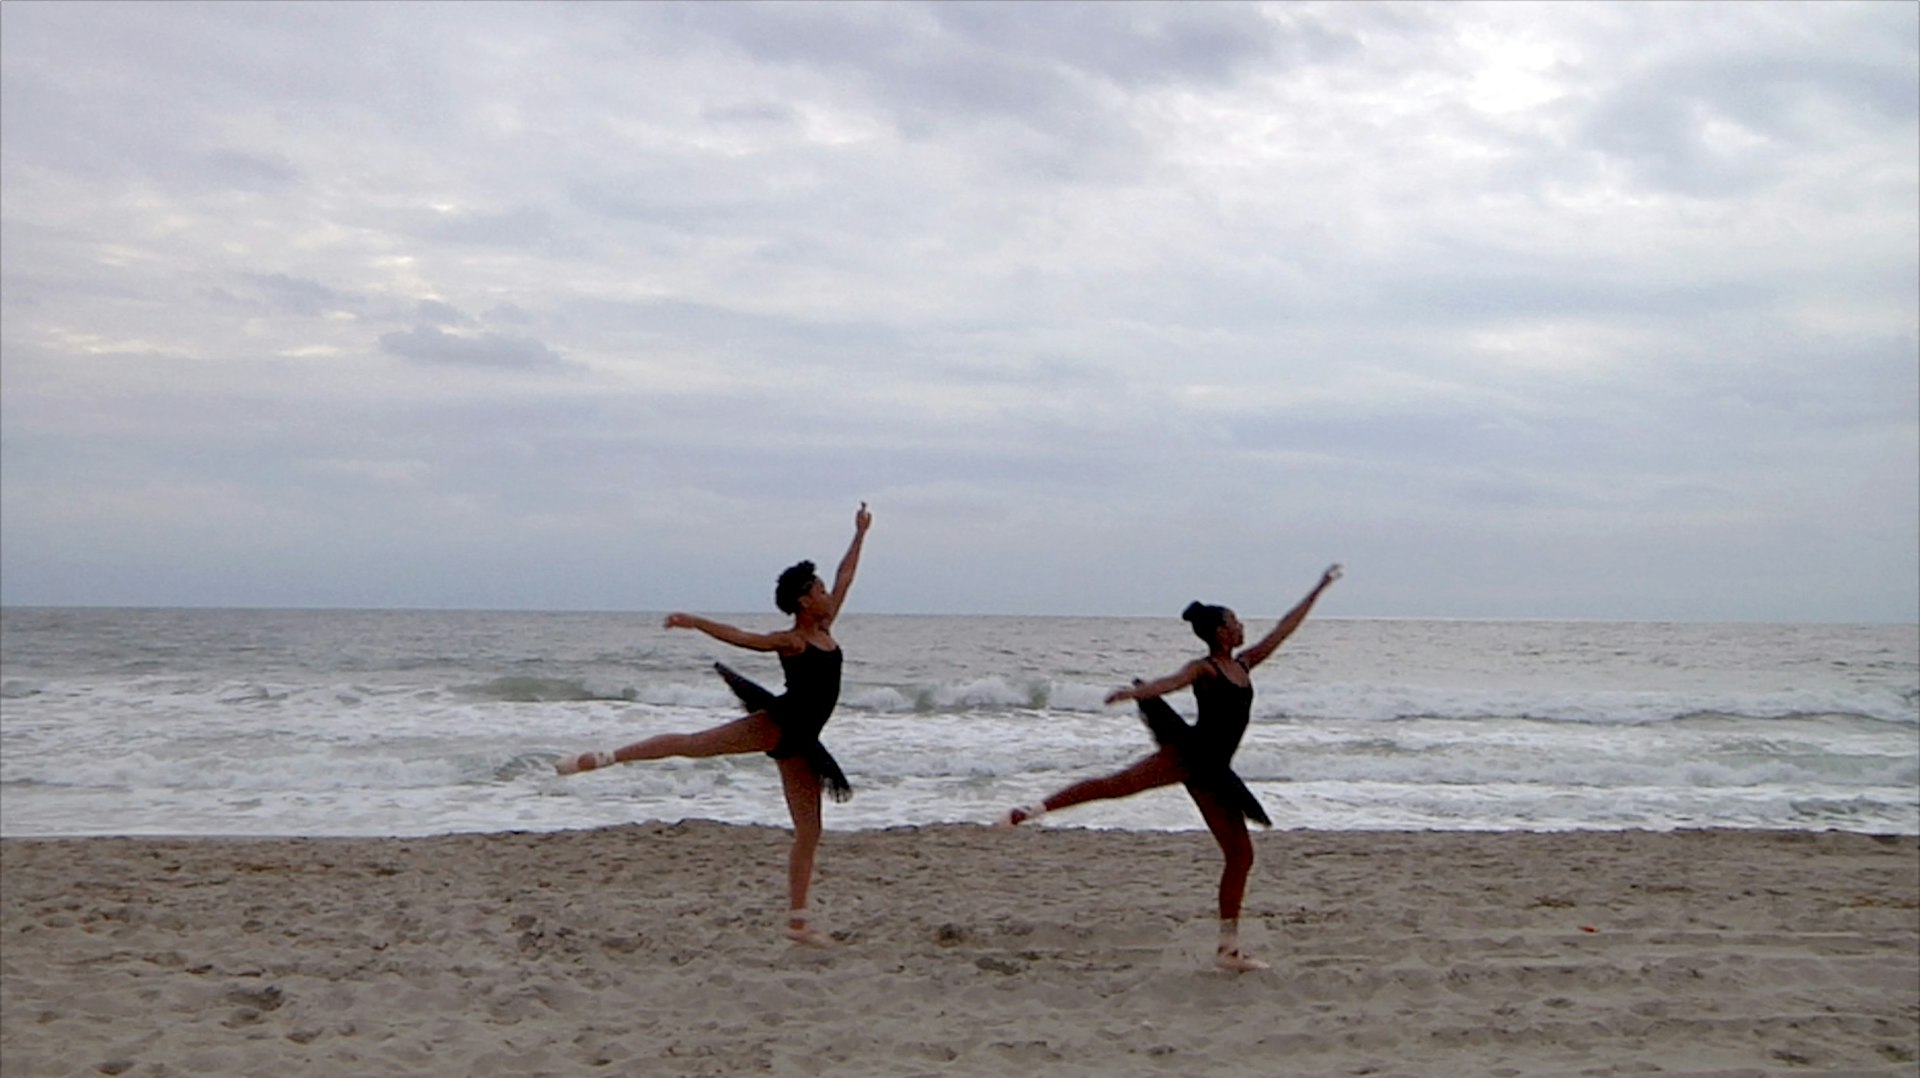 Raven Joseph and Tatianna Burchette, high school students in the Rockaways, dance on the beach hit by Hurricane Sandy 1000 days after the storm.